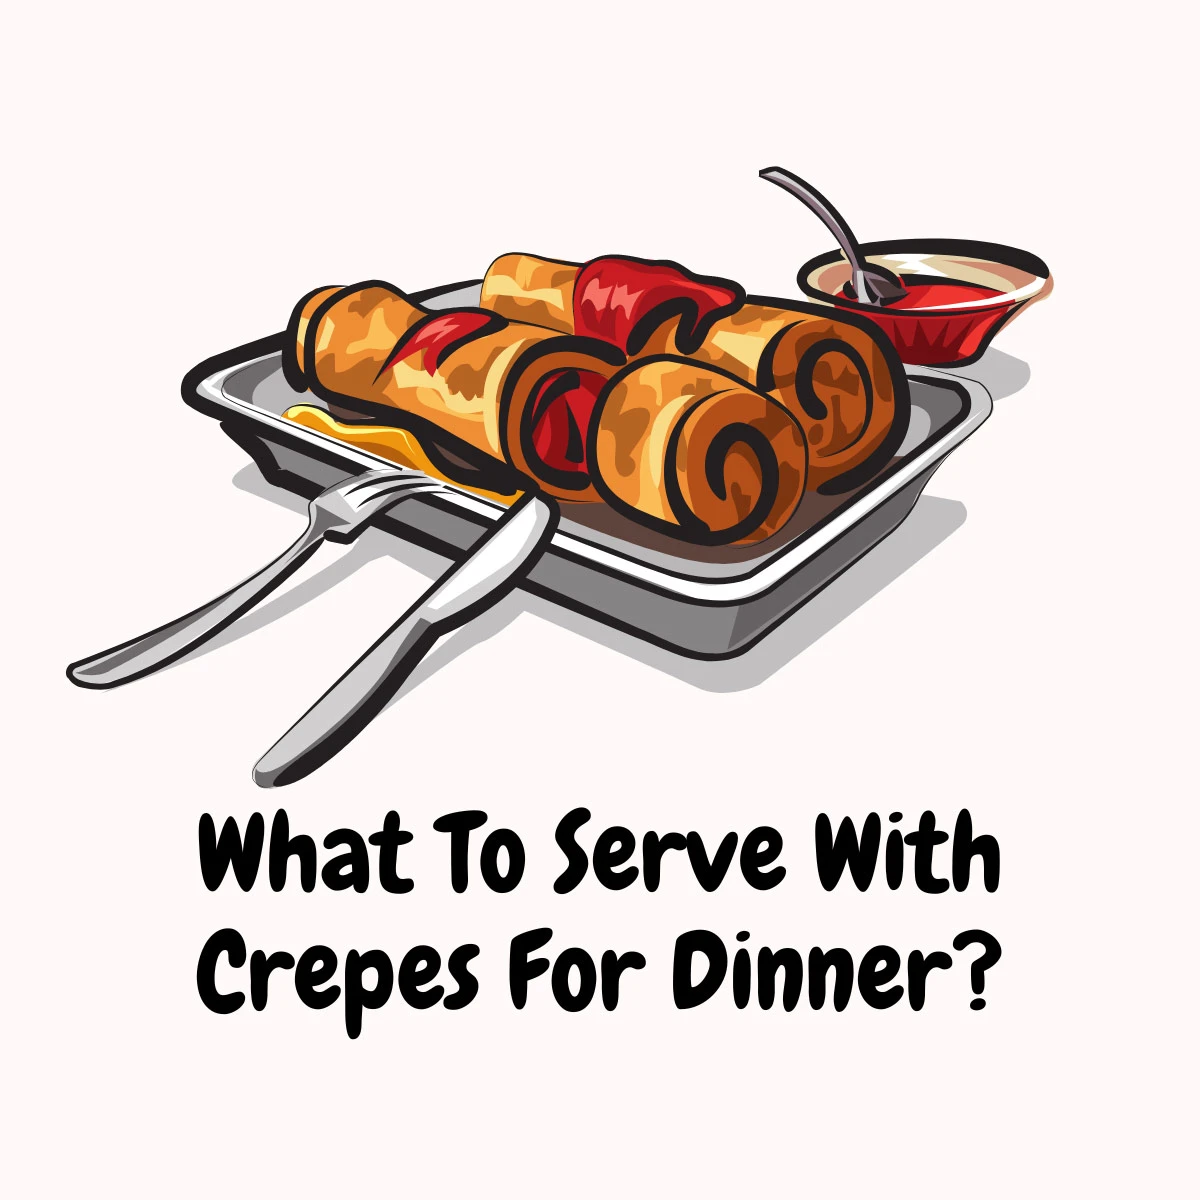 What To Serve With Crepes For Dinner featured image | Girl Meets Food